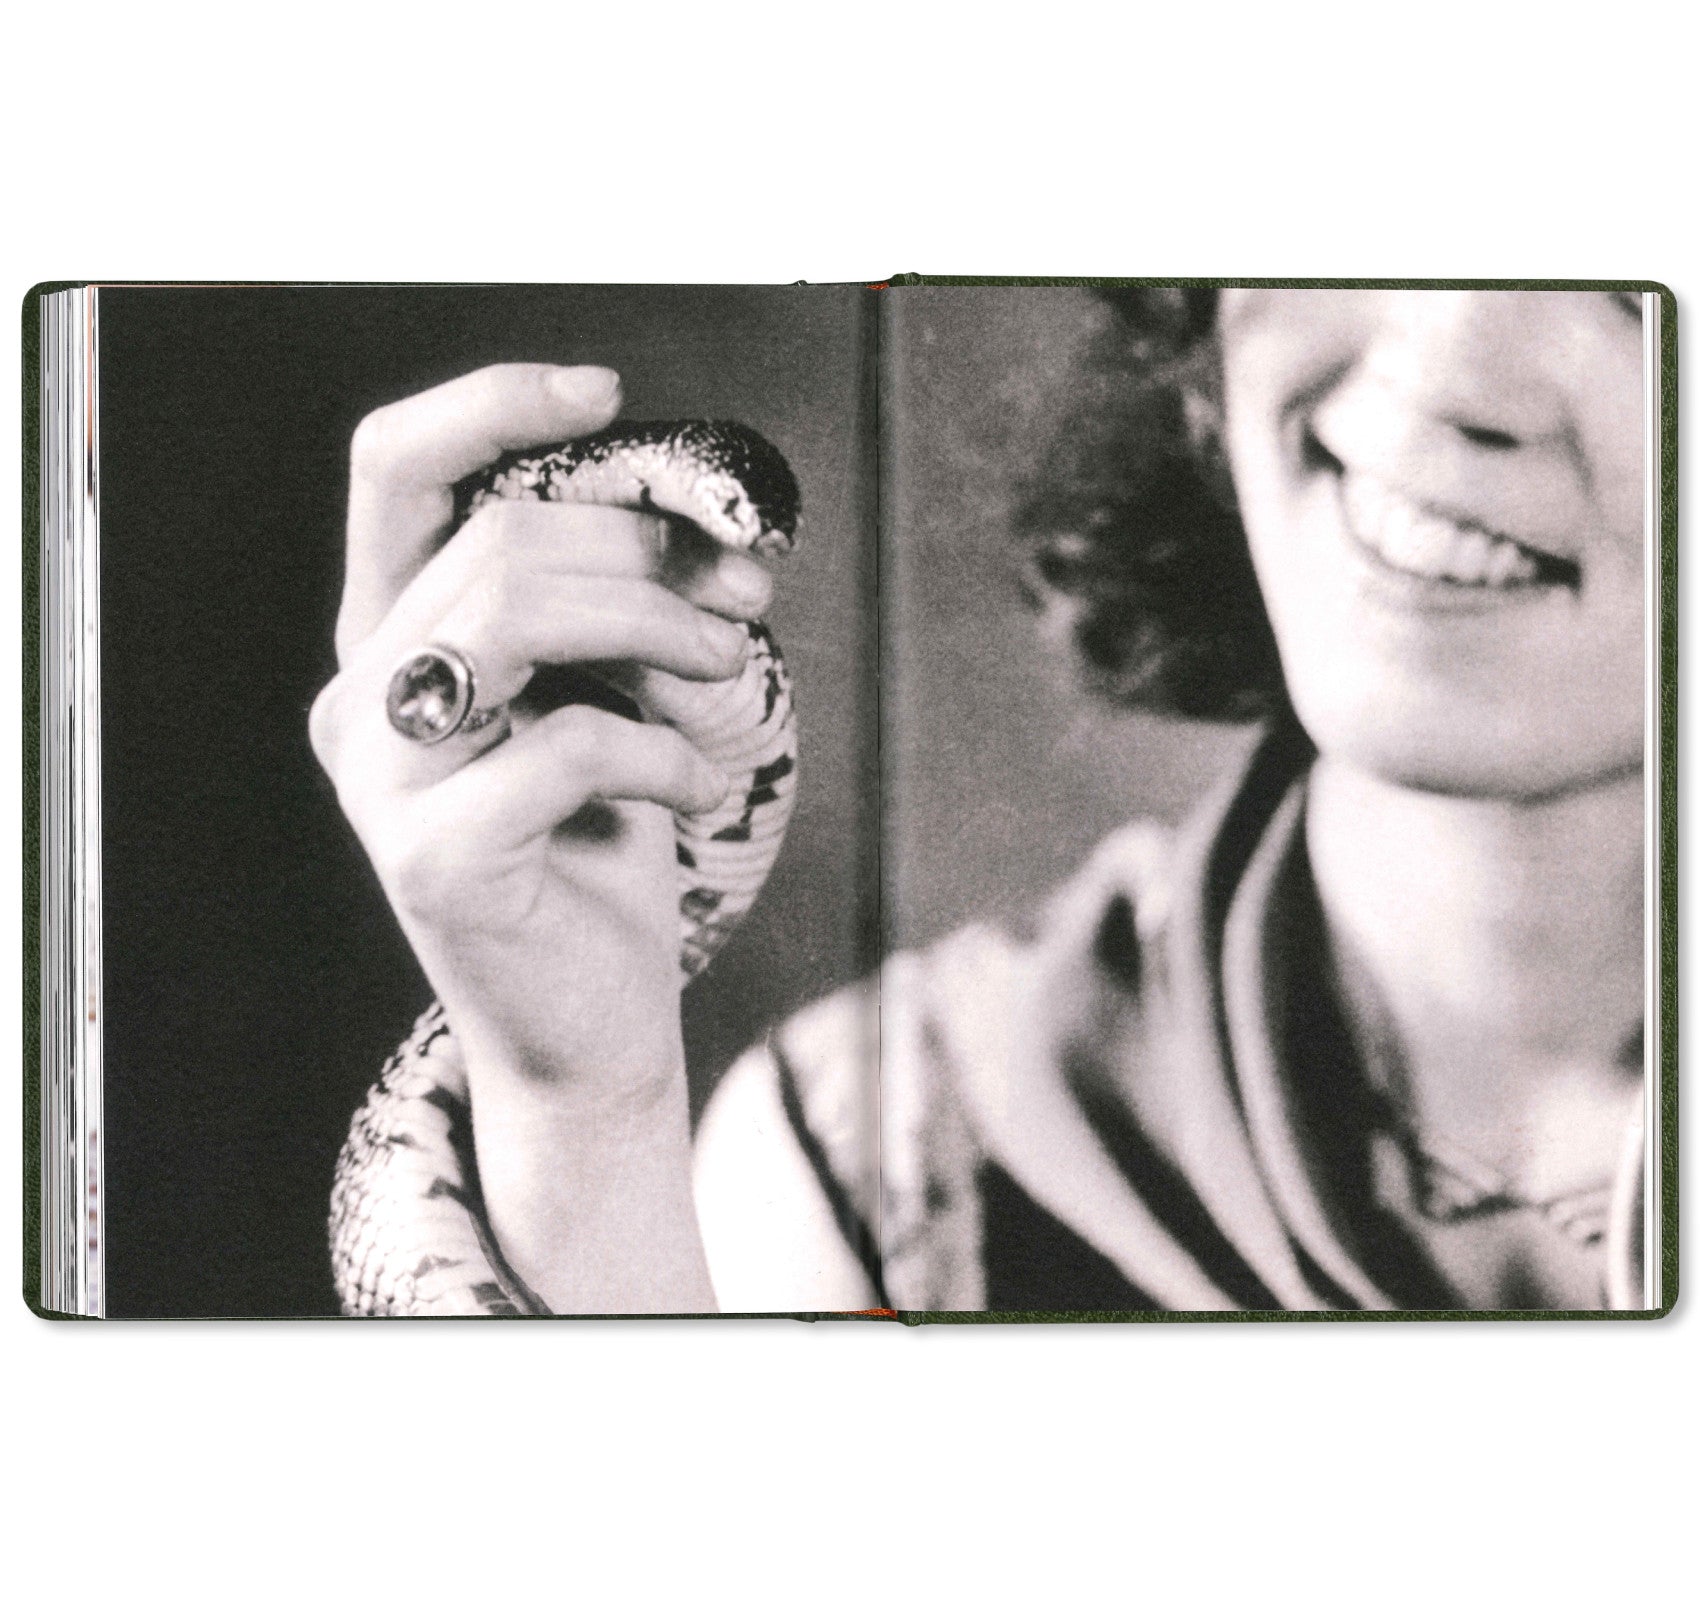 GIRL PLAYS WITH SNAKE by Clare Strand